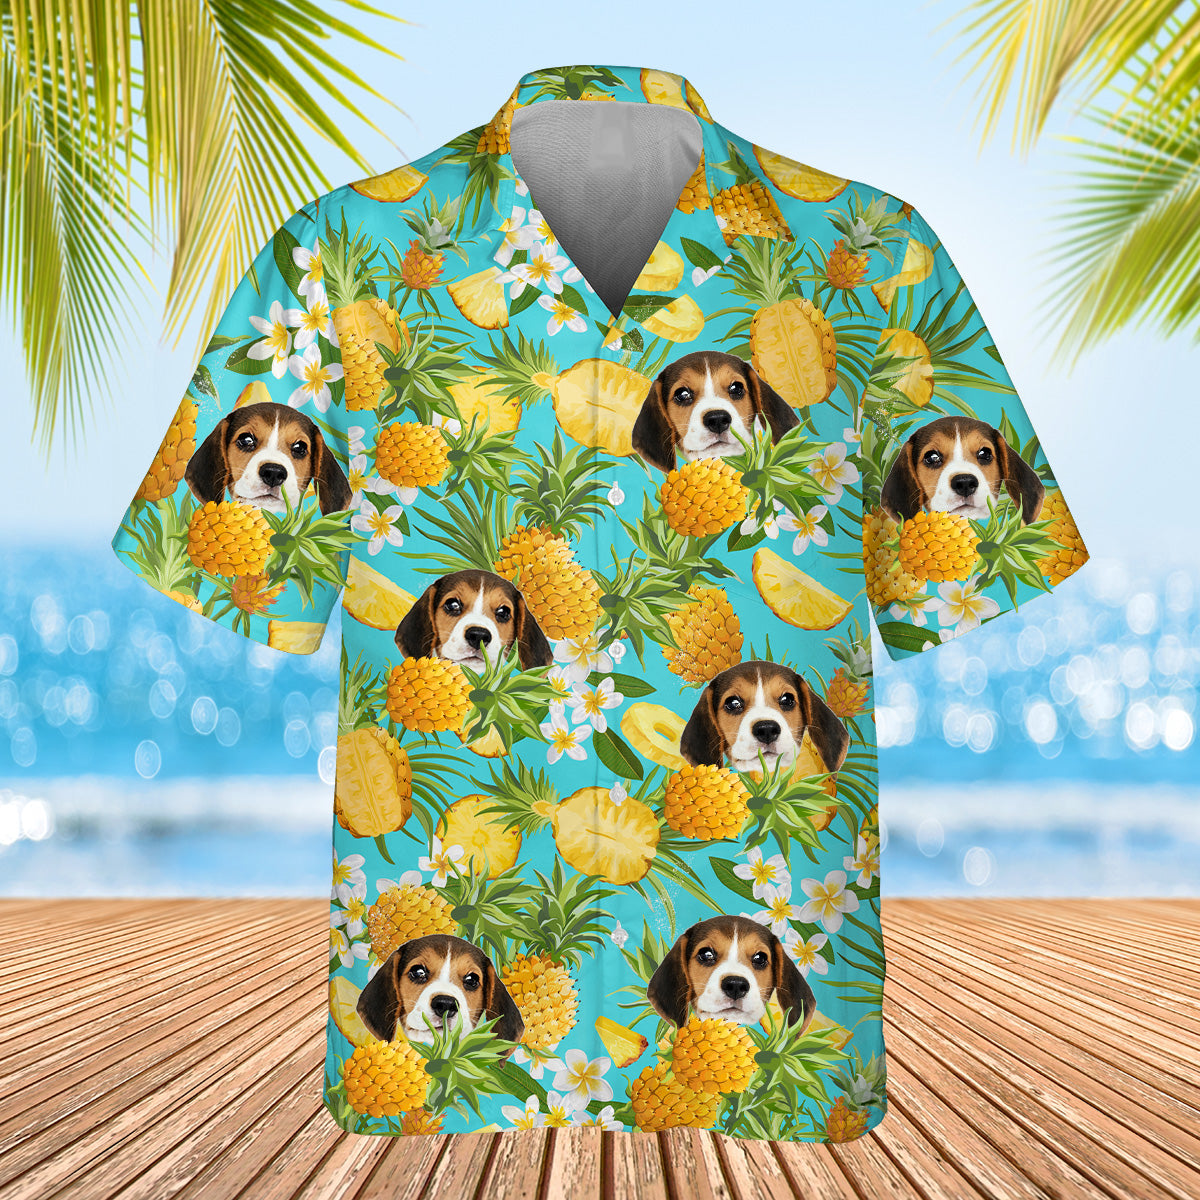 light blue pineapple themed shirt with dogs